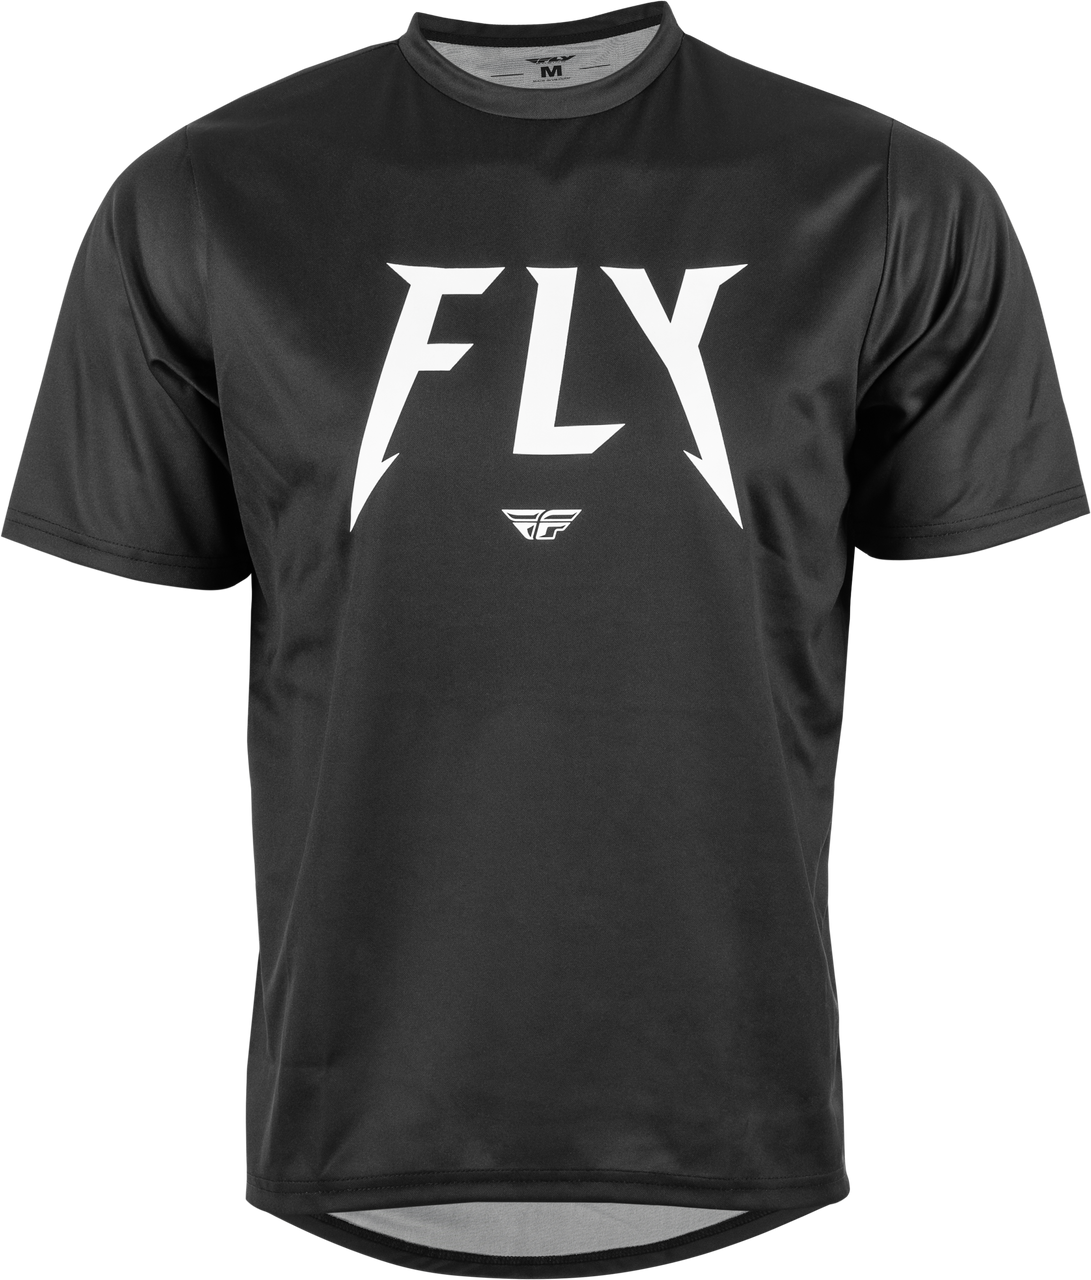 Fly Action Blk Jersey